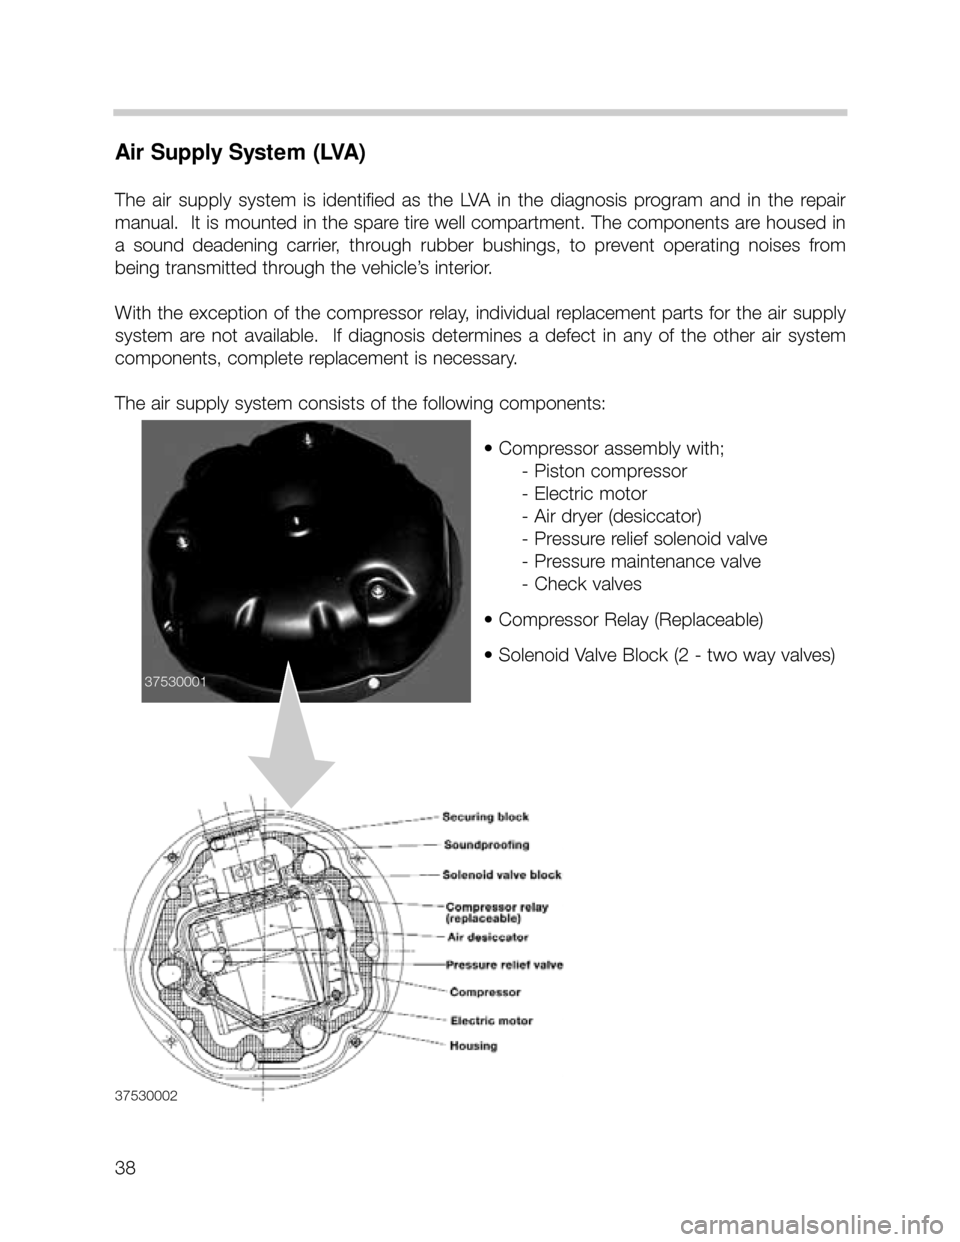 BMW X5 1999 E53 Workshop Manual Air Supply System (LVA)
The  air  supply  system  is  identified  as  the  LVA  in  the  diagnosis  program  and  in  the  repair
manual.  It is mounted in the spare tire well compartment. The compone